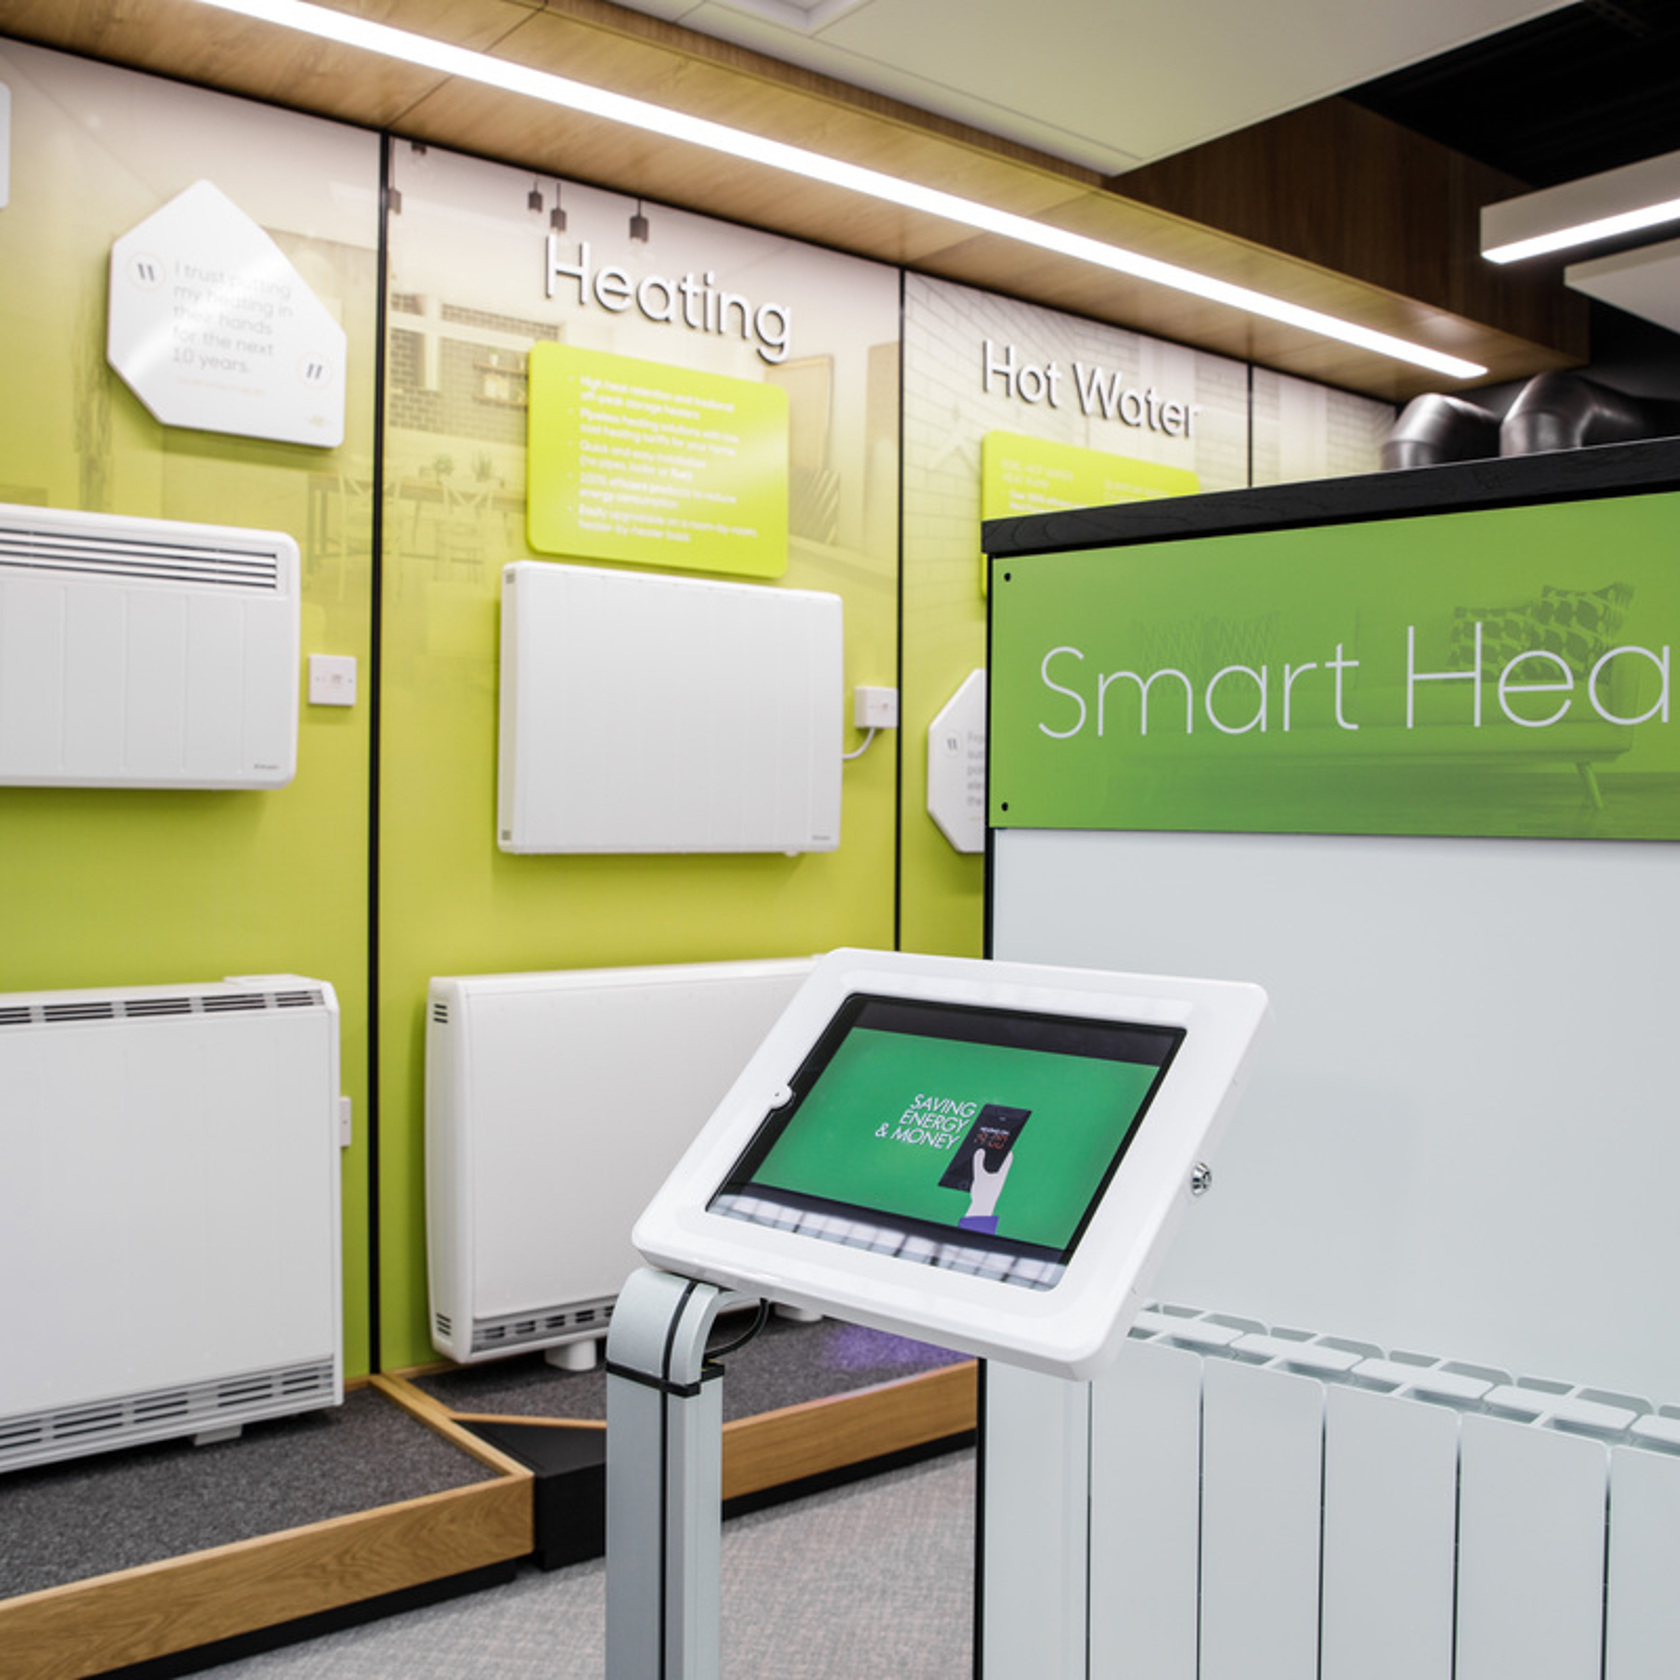 The smart heating display at Smarter Living.